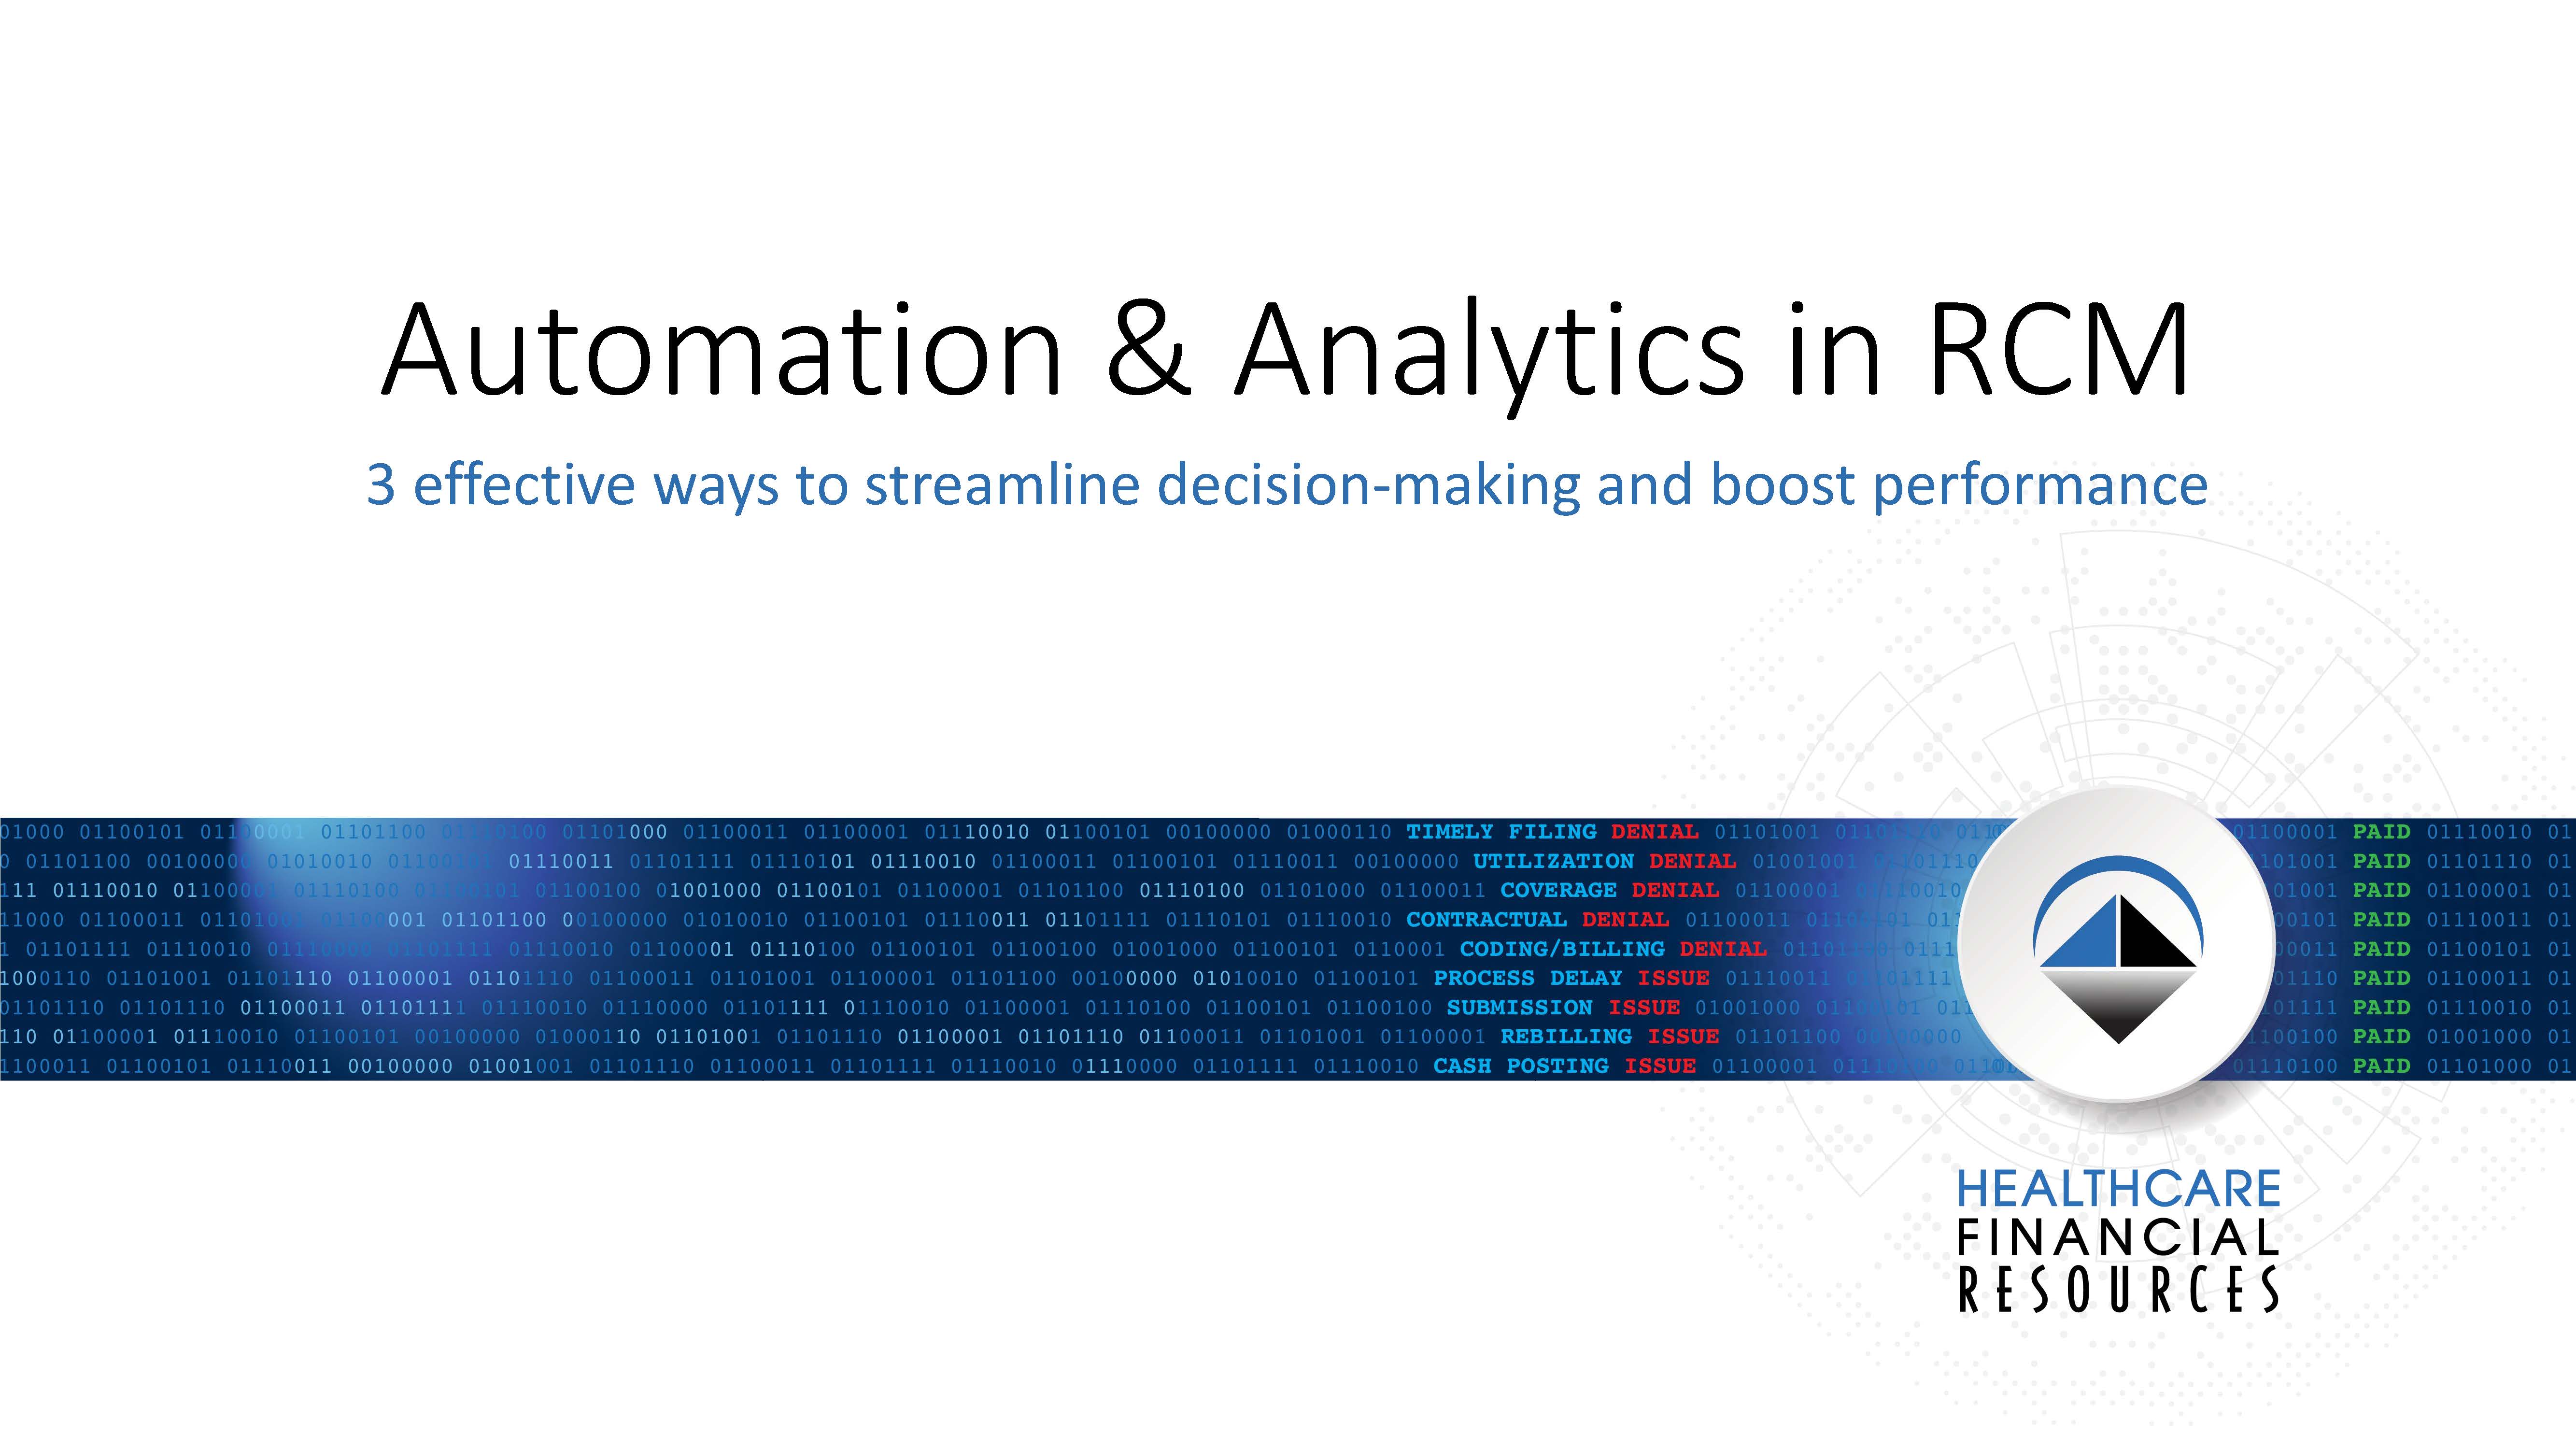 Automation & Analytics in RCM